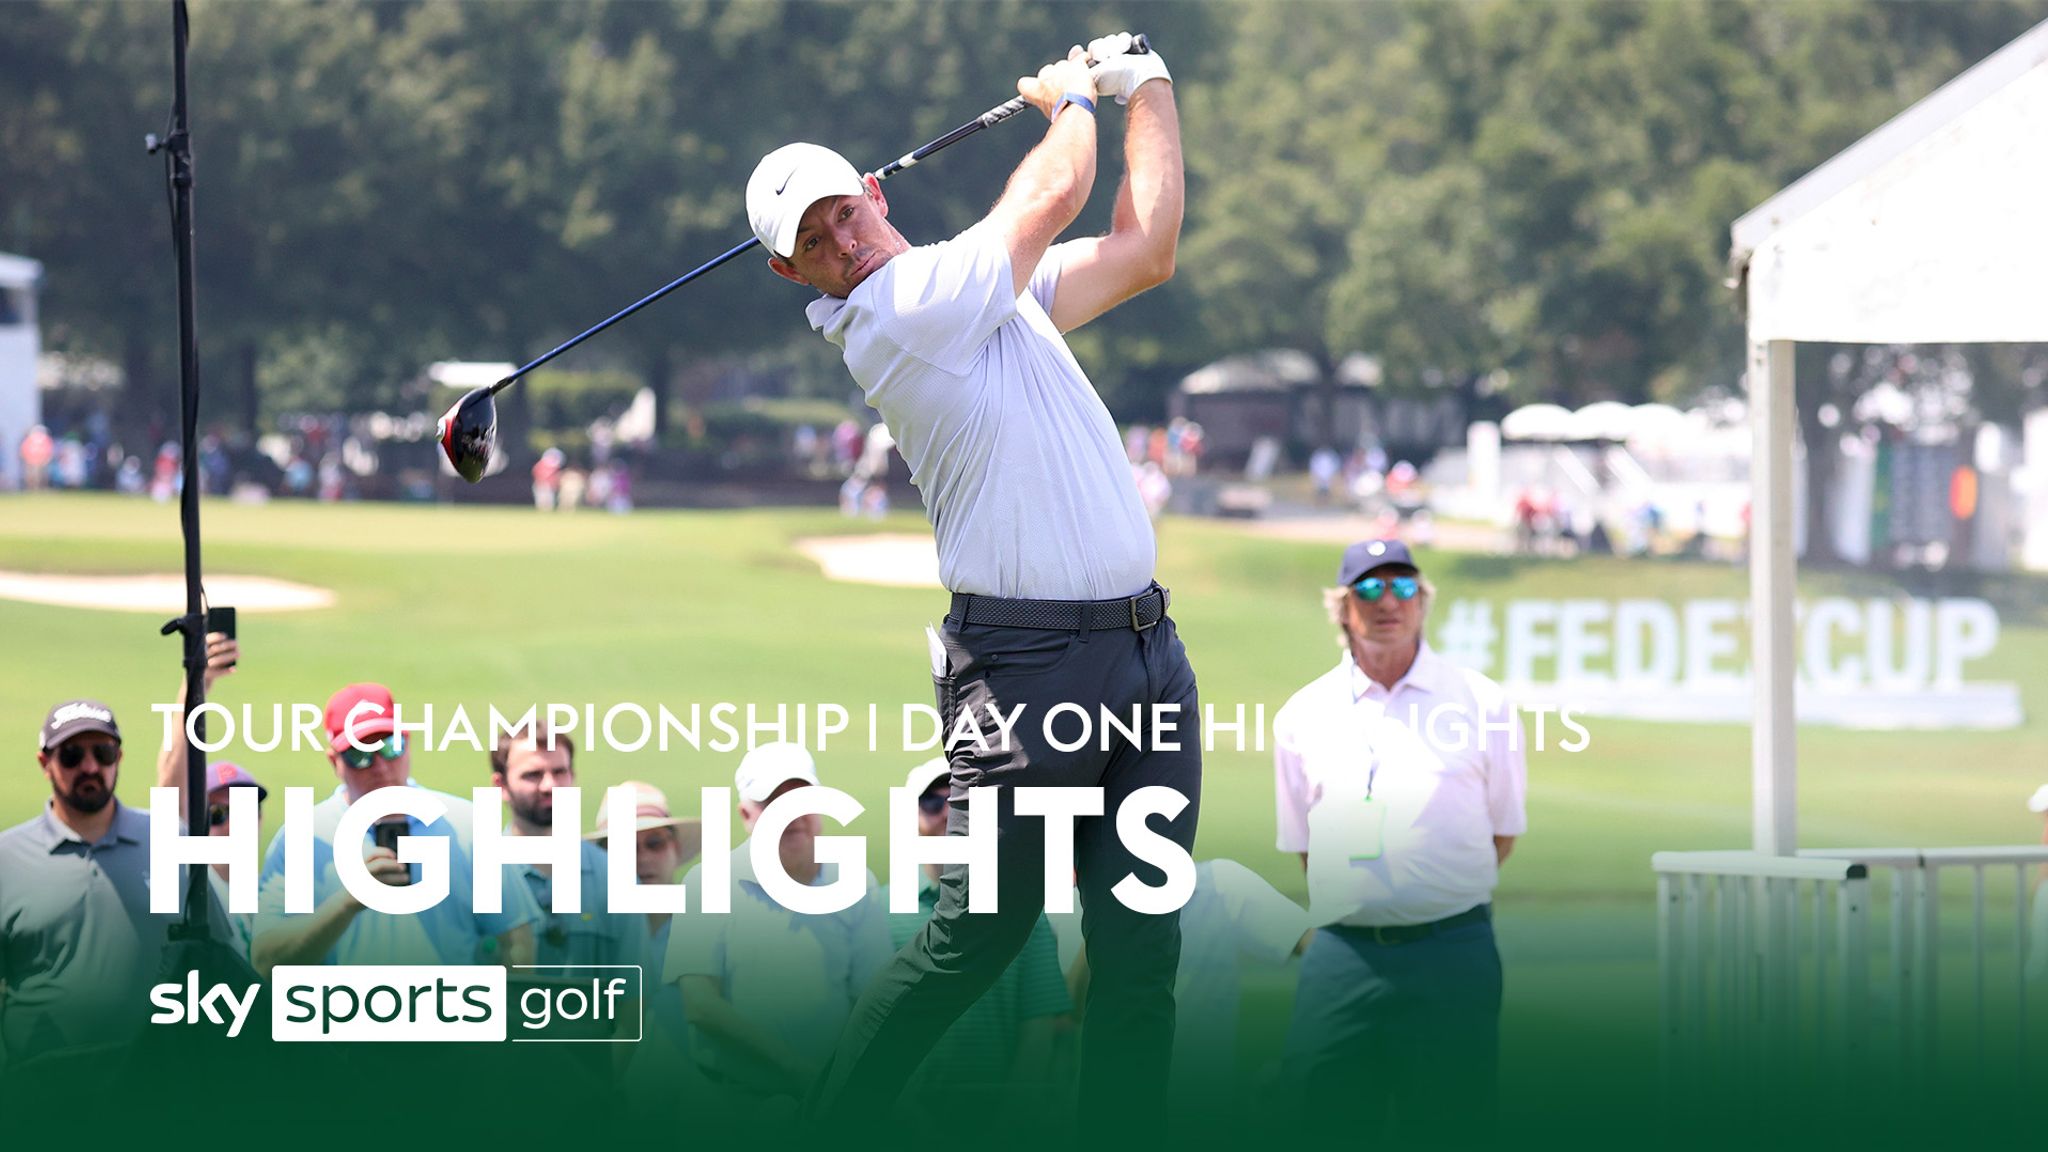 Tour Championship Day One highlights Video Watch TV Show Sky Sports